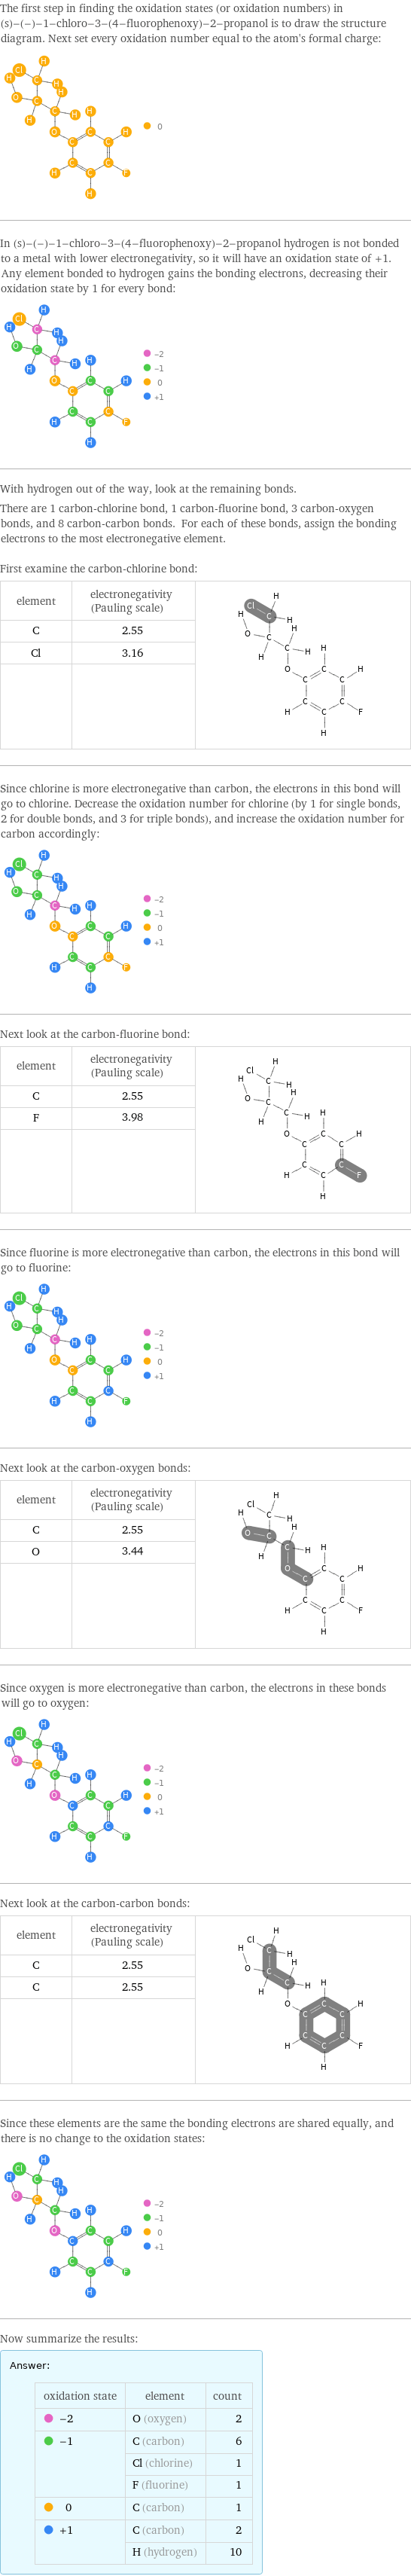 The first step in finding the oxidation states (or oxidation numbers) in (s)-(-)-1-chloro-3-(4-fluorophenoxy)-2-propanol is to draw the structure diagram. Next set every oxidation number equal to the atom's formal charge:  In (s)-(-)-1-chloro-3-(4-fluorophenoxy)-2-propanol hydrogen is not bonded to a metal with lower electronegativity, so it will have an oxidation state of +1. Any element bonded to hydrogen gains the bonding electrons, decreasing their oxidation state by 1 for every bond:  With hydrogen out of the way, look at the remaining bonds. There are 1 carbon-chlorine bond, 1 carbon-fluorine bond, 3 carbon-oxygen bonds, and 8 carbon-carbon bonds. For each of these bonds, assign the bonding electrons to the most electronegative element.  First examine the carbon-chlorine bond: element | electronegativity (Pauling scale) |  C | 2.55 |  Cl | 3.16 |   | |  Since chlorine is more electronegative than carbon, the electrons in this bond will go to chlorine. Decrease the oxidation number for chlorine (by 1 for single bonds, 2 for double bonds, and 3 for triple bonds), and increase the oxidation number for carbon accordingly:  Next look at the carbon-fluorine bond: element | electronegativity (Pauling scale) |  C | 2.55 |  F | 3.98 |   | |  Since fluorine is more electronegative than carbon, the electrons in this bond will go to fluorine:  Next look at the carbon-oxygen bonds: element | electronegativity (Pauling scale) |  C | 2.55 |  O | 3.44 |   | |  Since oxygen is more electronegative than carbon, the electrons in these bonds will go to oxygen:  Next look at the carbon-carbon bonds: element | electronegativity (Pauling scale) |  C | 2.55 |  C | 2.55 |   | |  Since these elements are the same the bonding electrons are shared equally, and there is no change to the oxidation states:  Now summarize the results: Answer: |   | oxidation state | element | count  -2 | O (oxygen) | 2  -1 | C (carbon) | 6  | Cl (chlorine) | 1  | F (fluorine) | 1  0 | C (carbon) | 1  +1 | C (carbon) | 2  | H (hydrogen) | 10